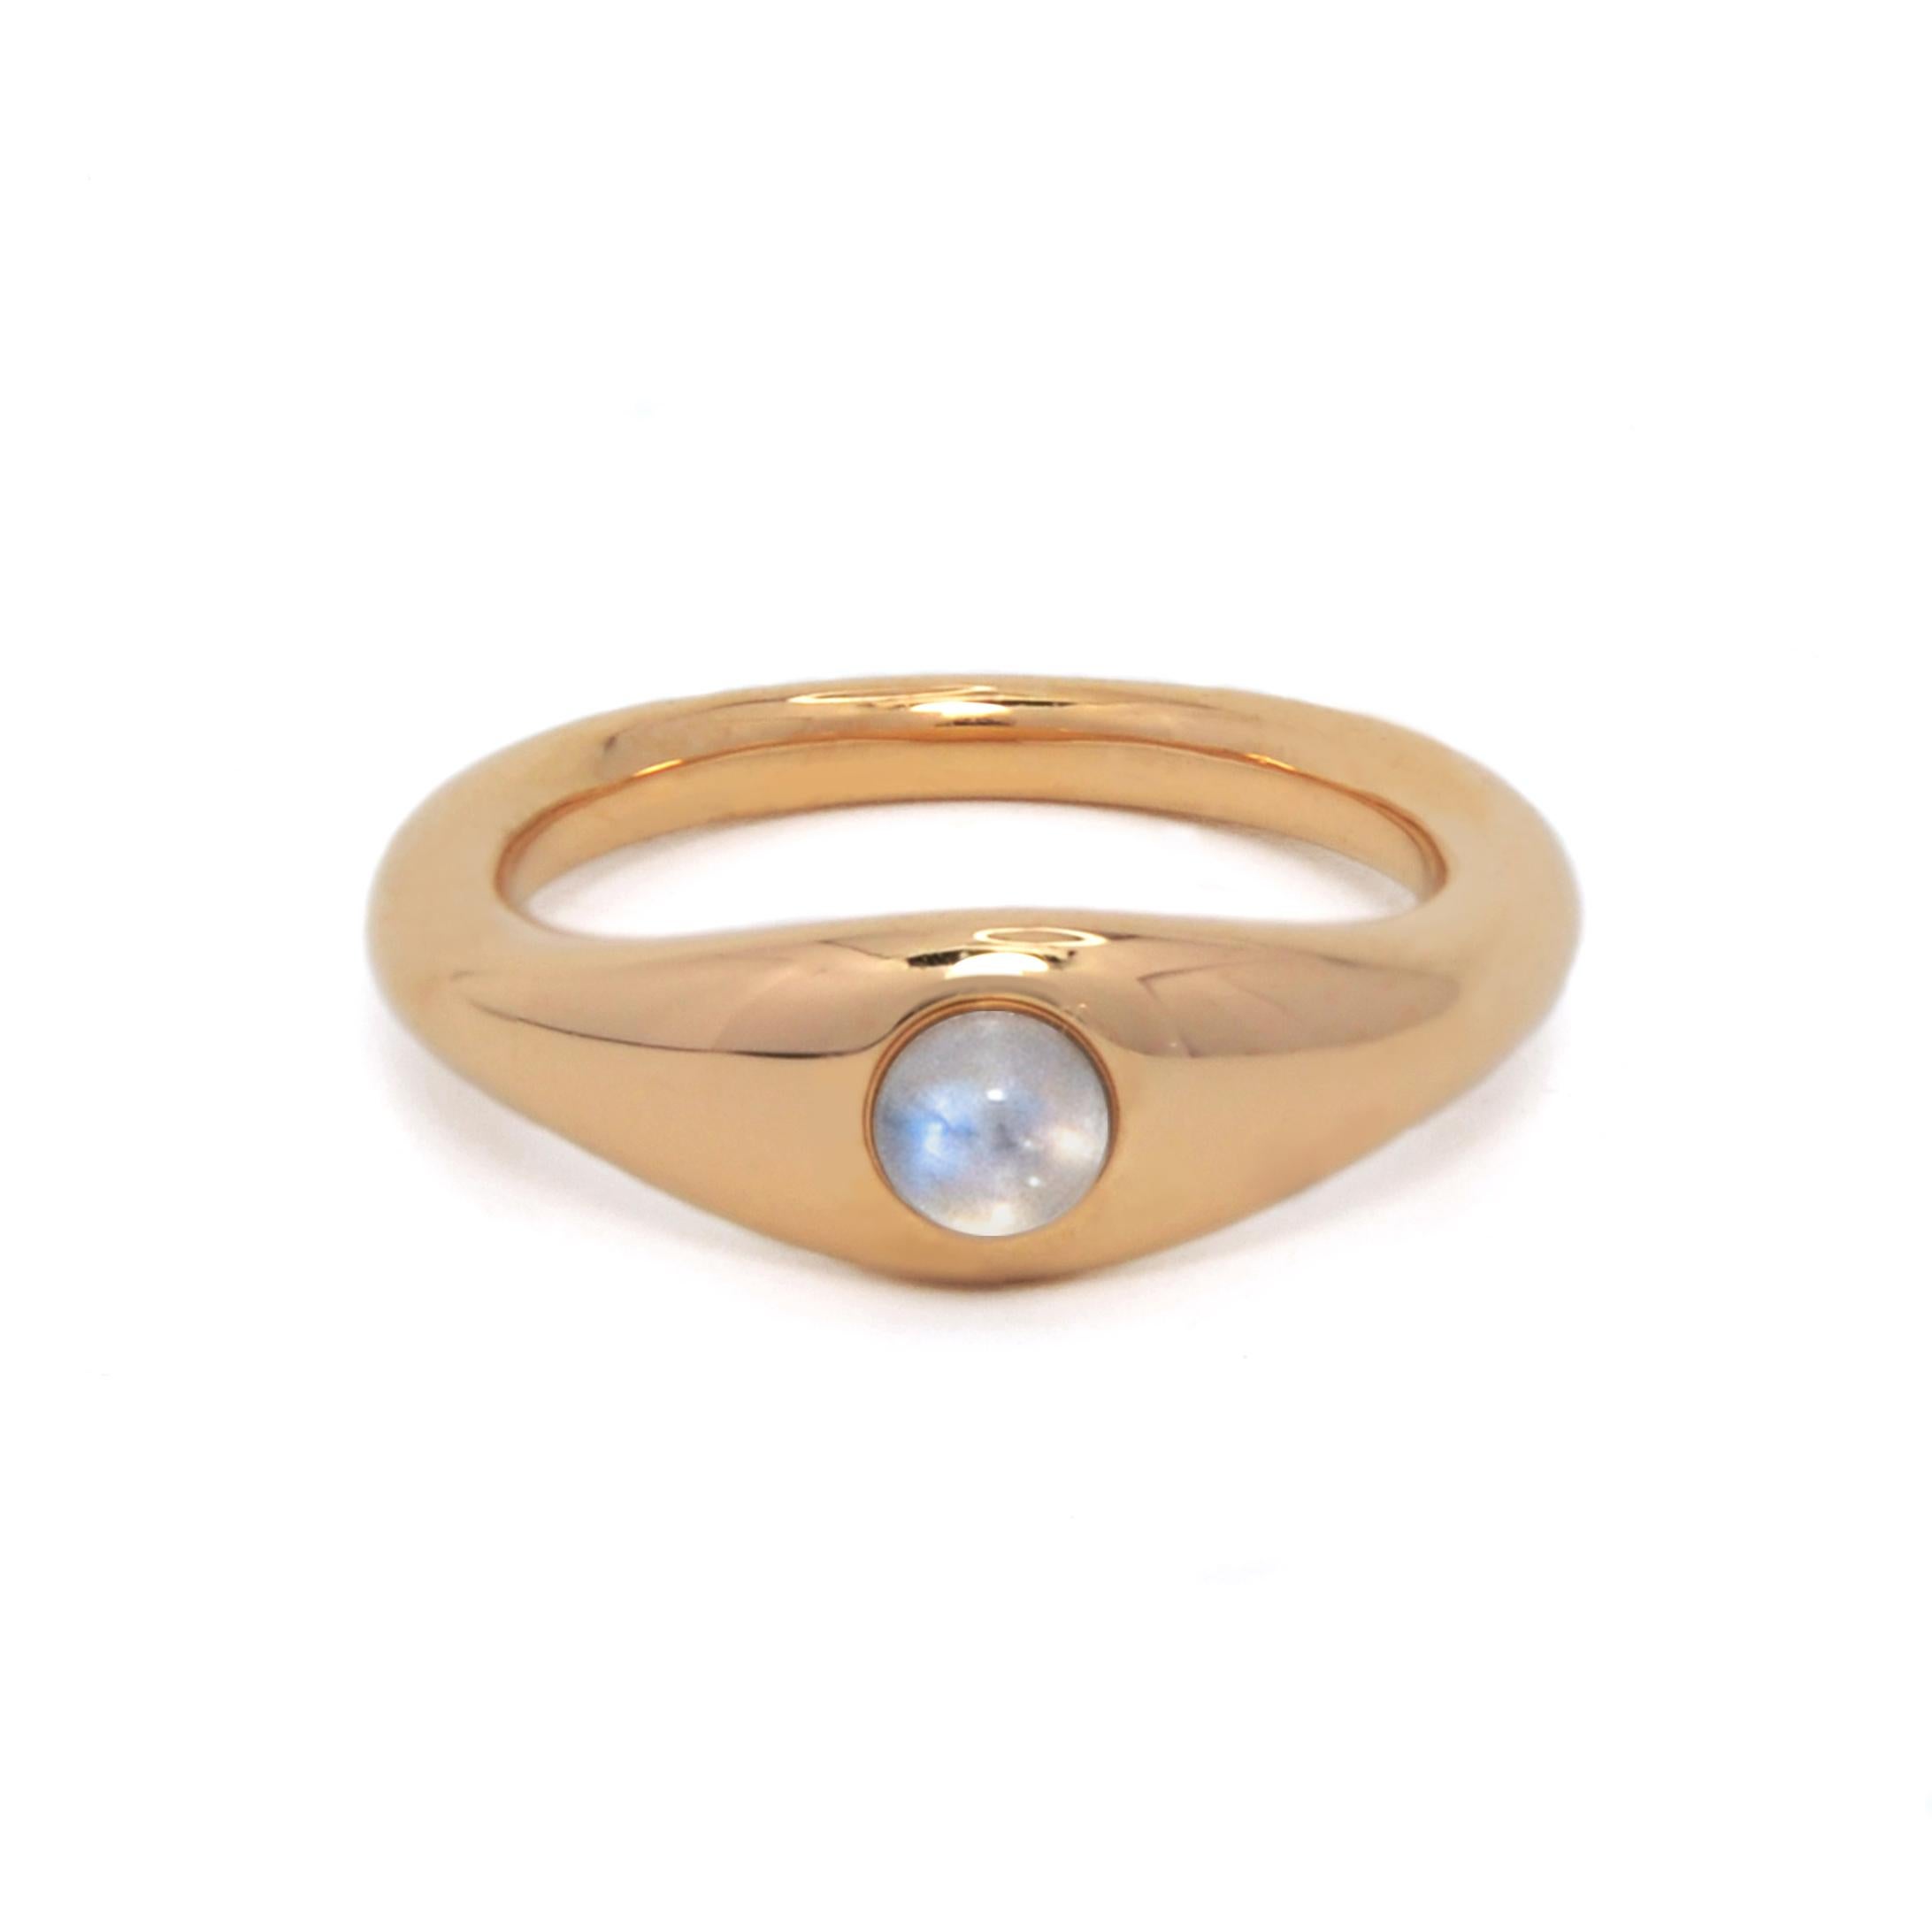 For Sale:  Ruth Nyc Lun Ring, 14k Yellow Gold and Moonstone Ring